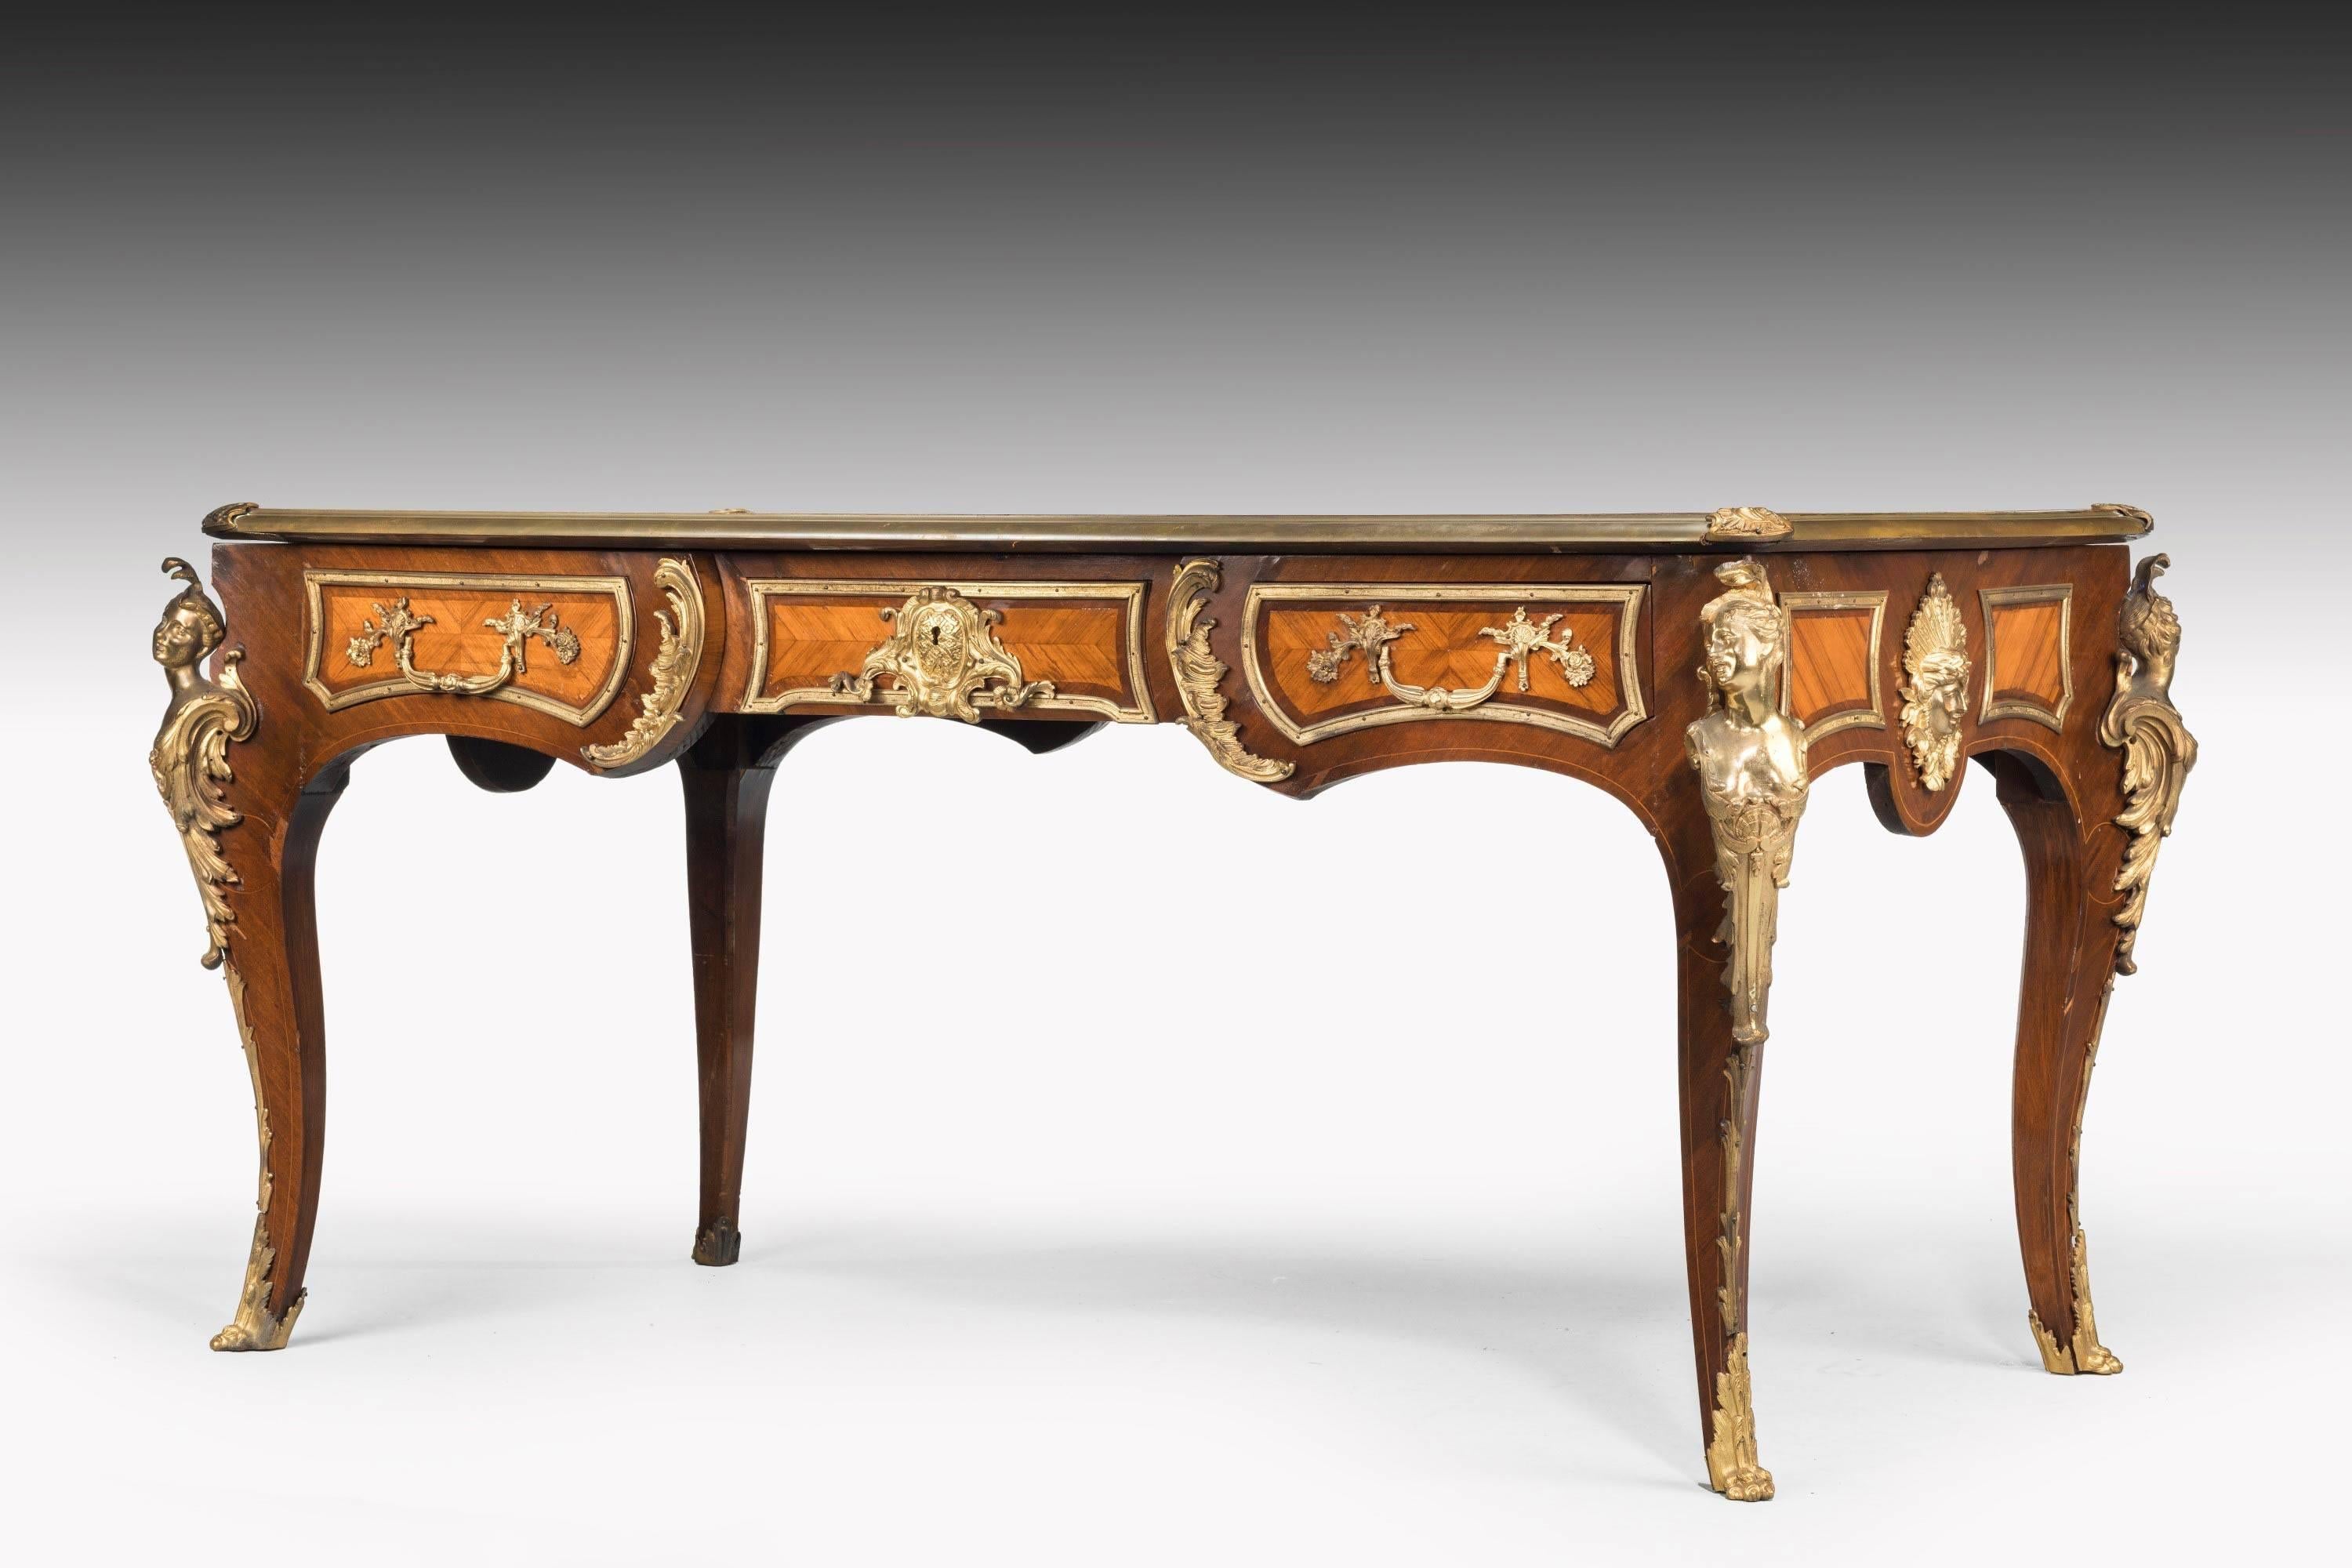 A 19th century French kingwood and rosewood writing table. Particularly fine and original gilt bronze mounts and sabots. Pronounced strong construction, large in relationship to the proportions of the table and entirely original.